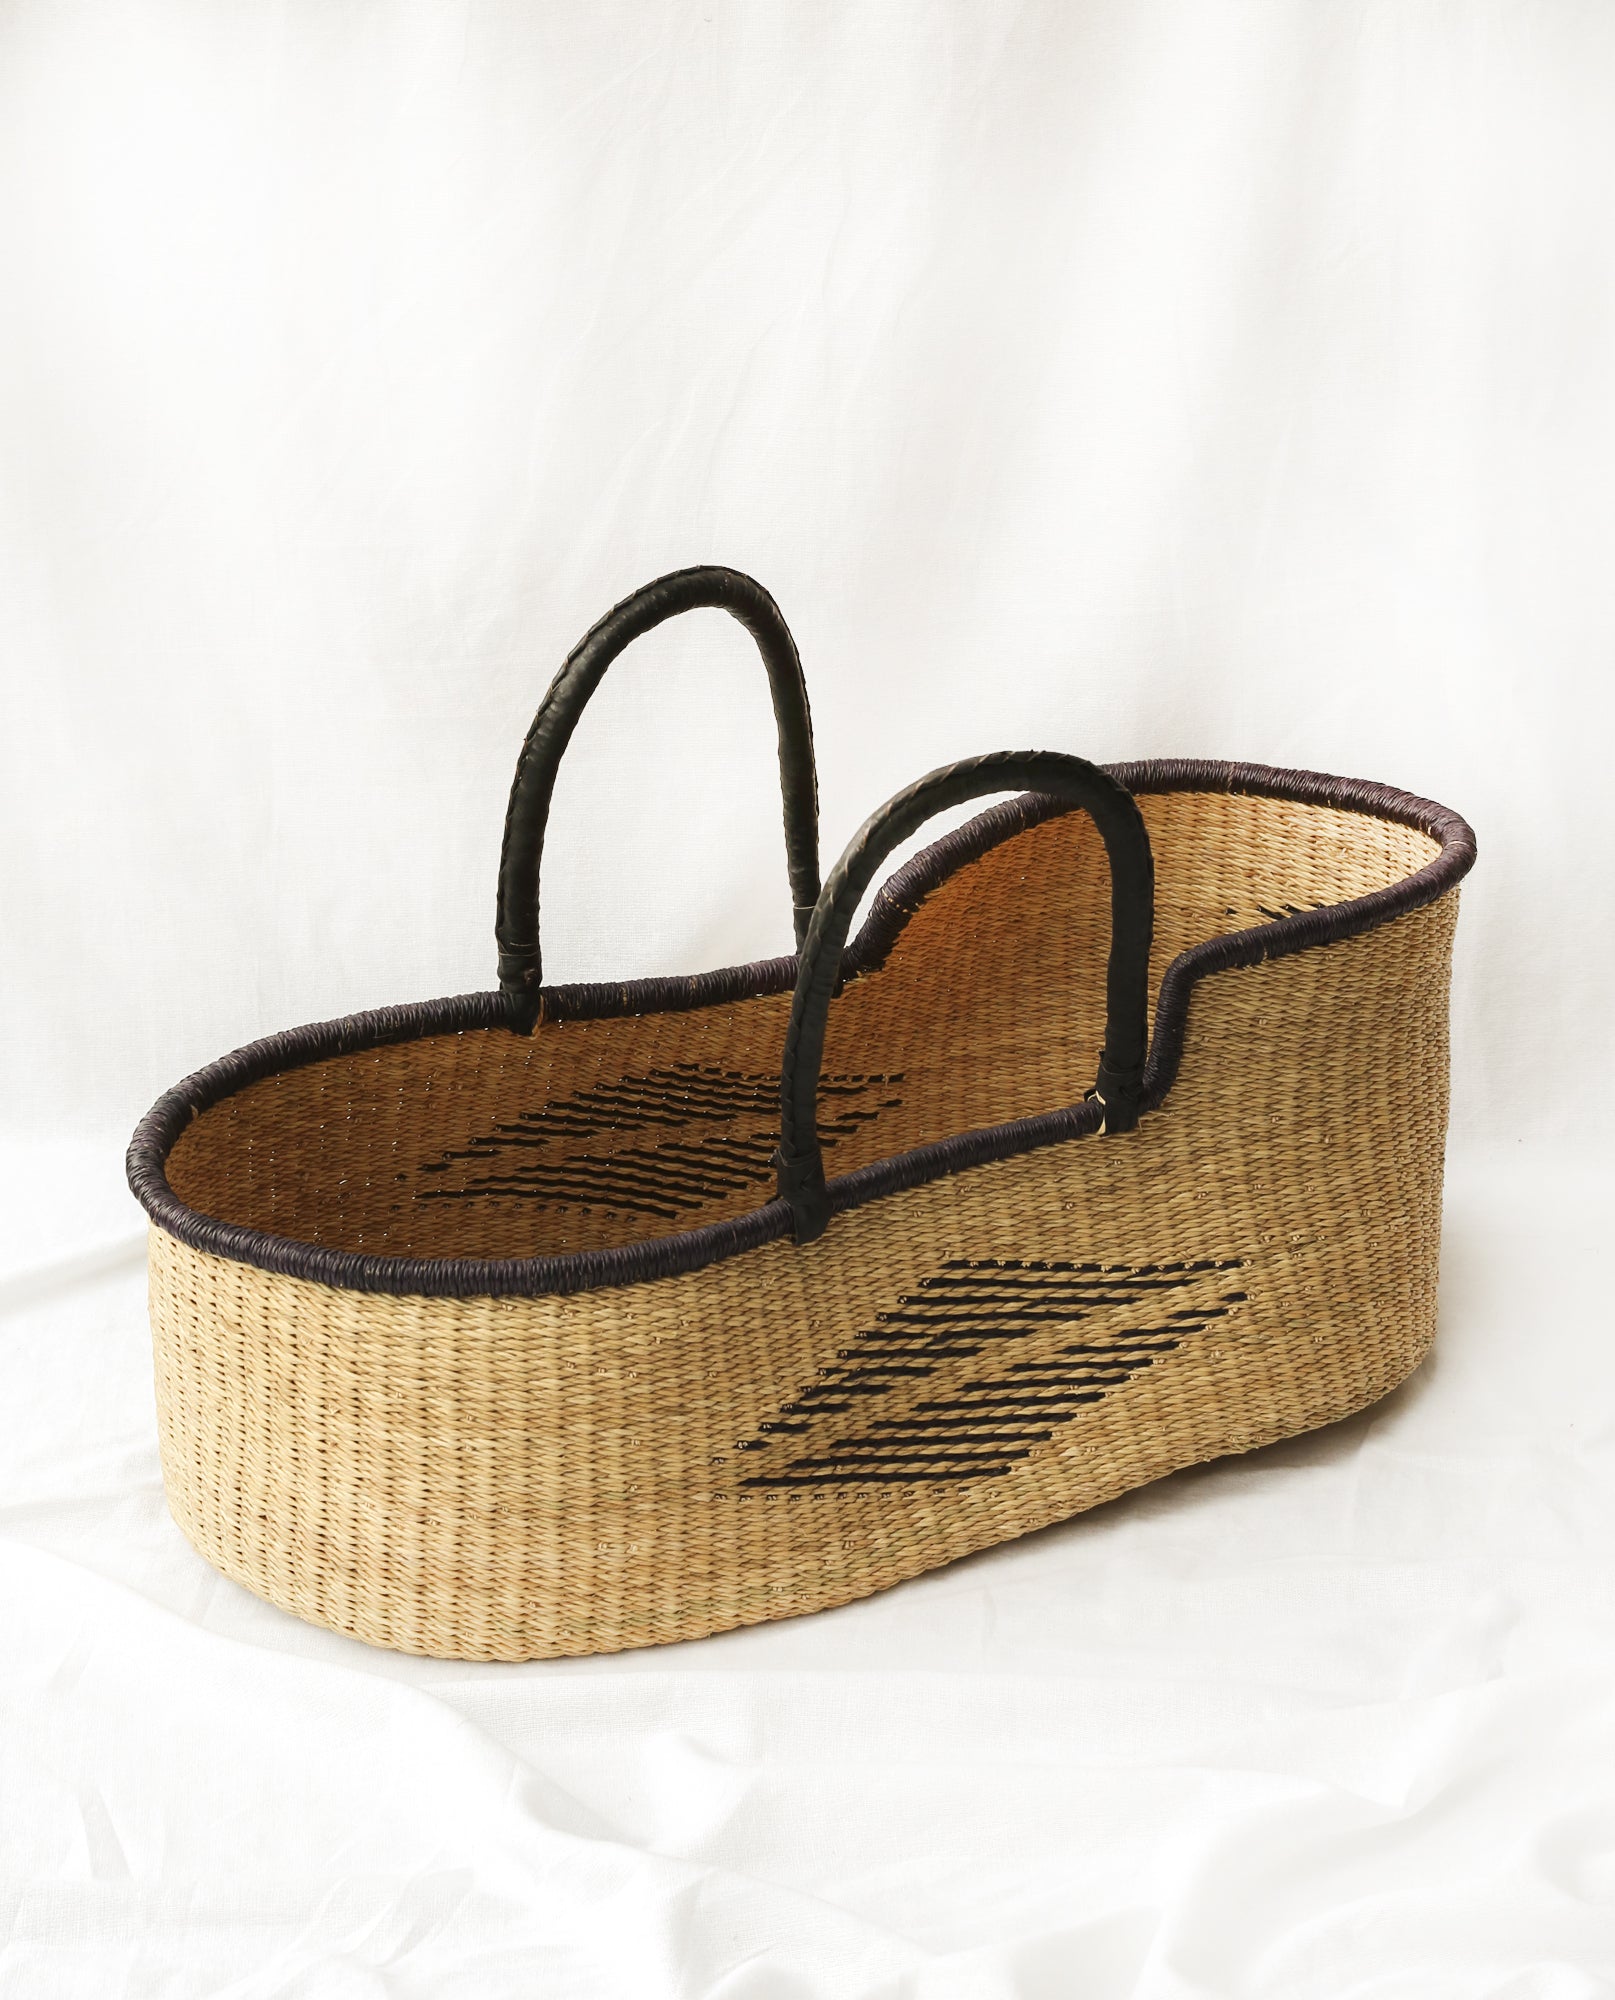 KOJO Handwoven Moses Basket with Leather Handles